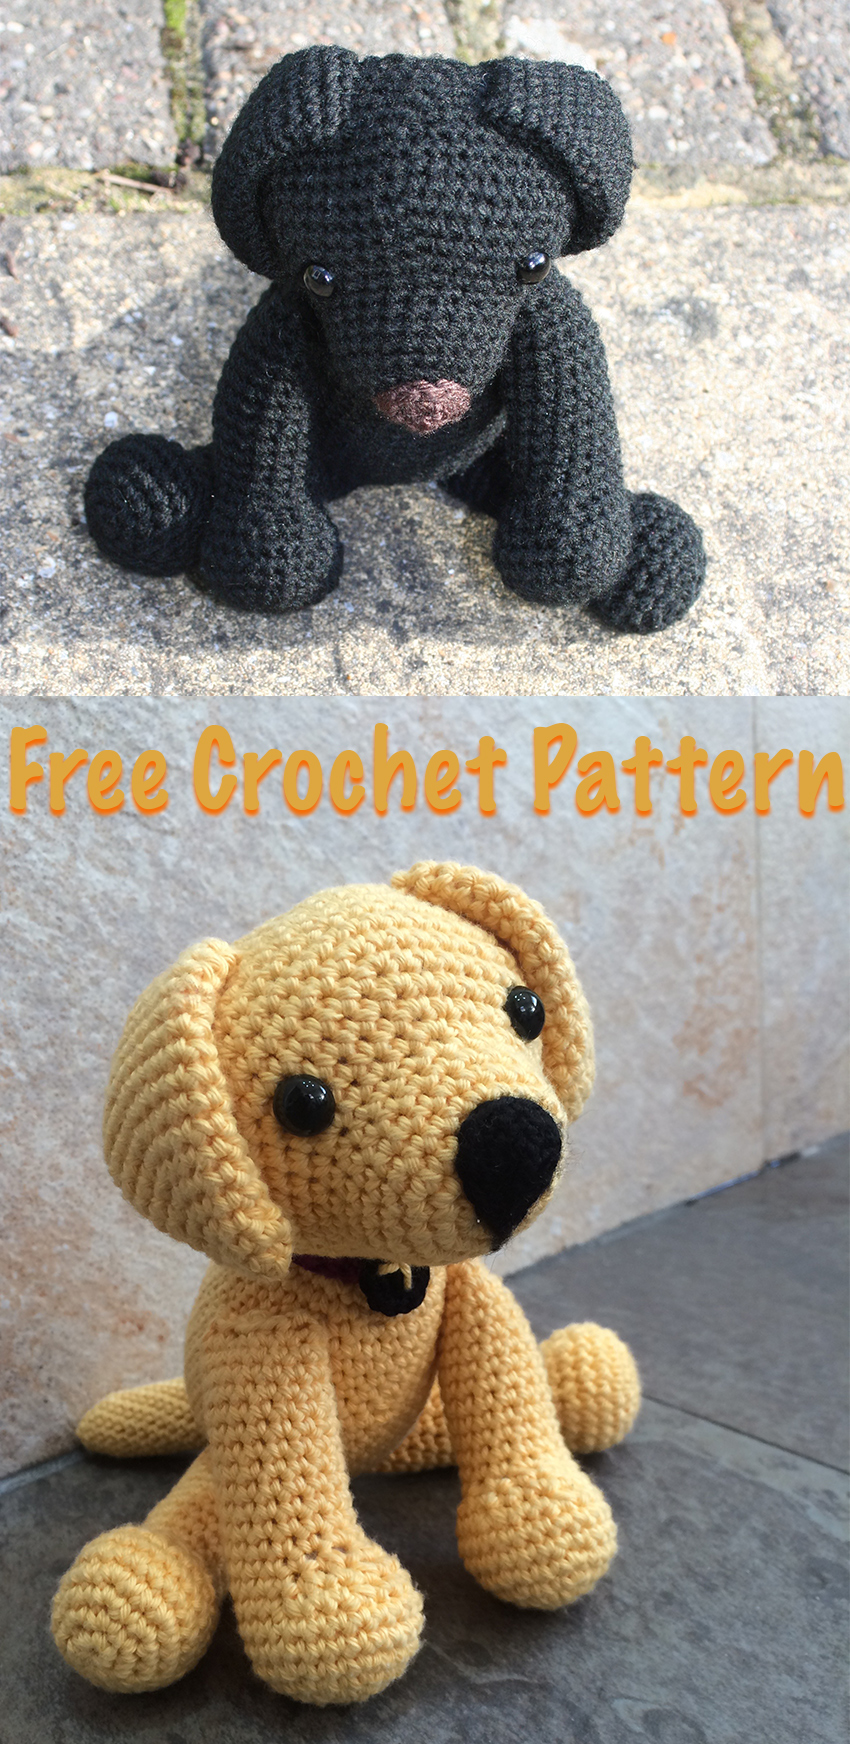 Free Crochet Lab Puppy Pattern. How to crochet your own toy Lab puppy, with simple instructions. By Lucy Kate Crochet.